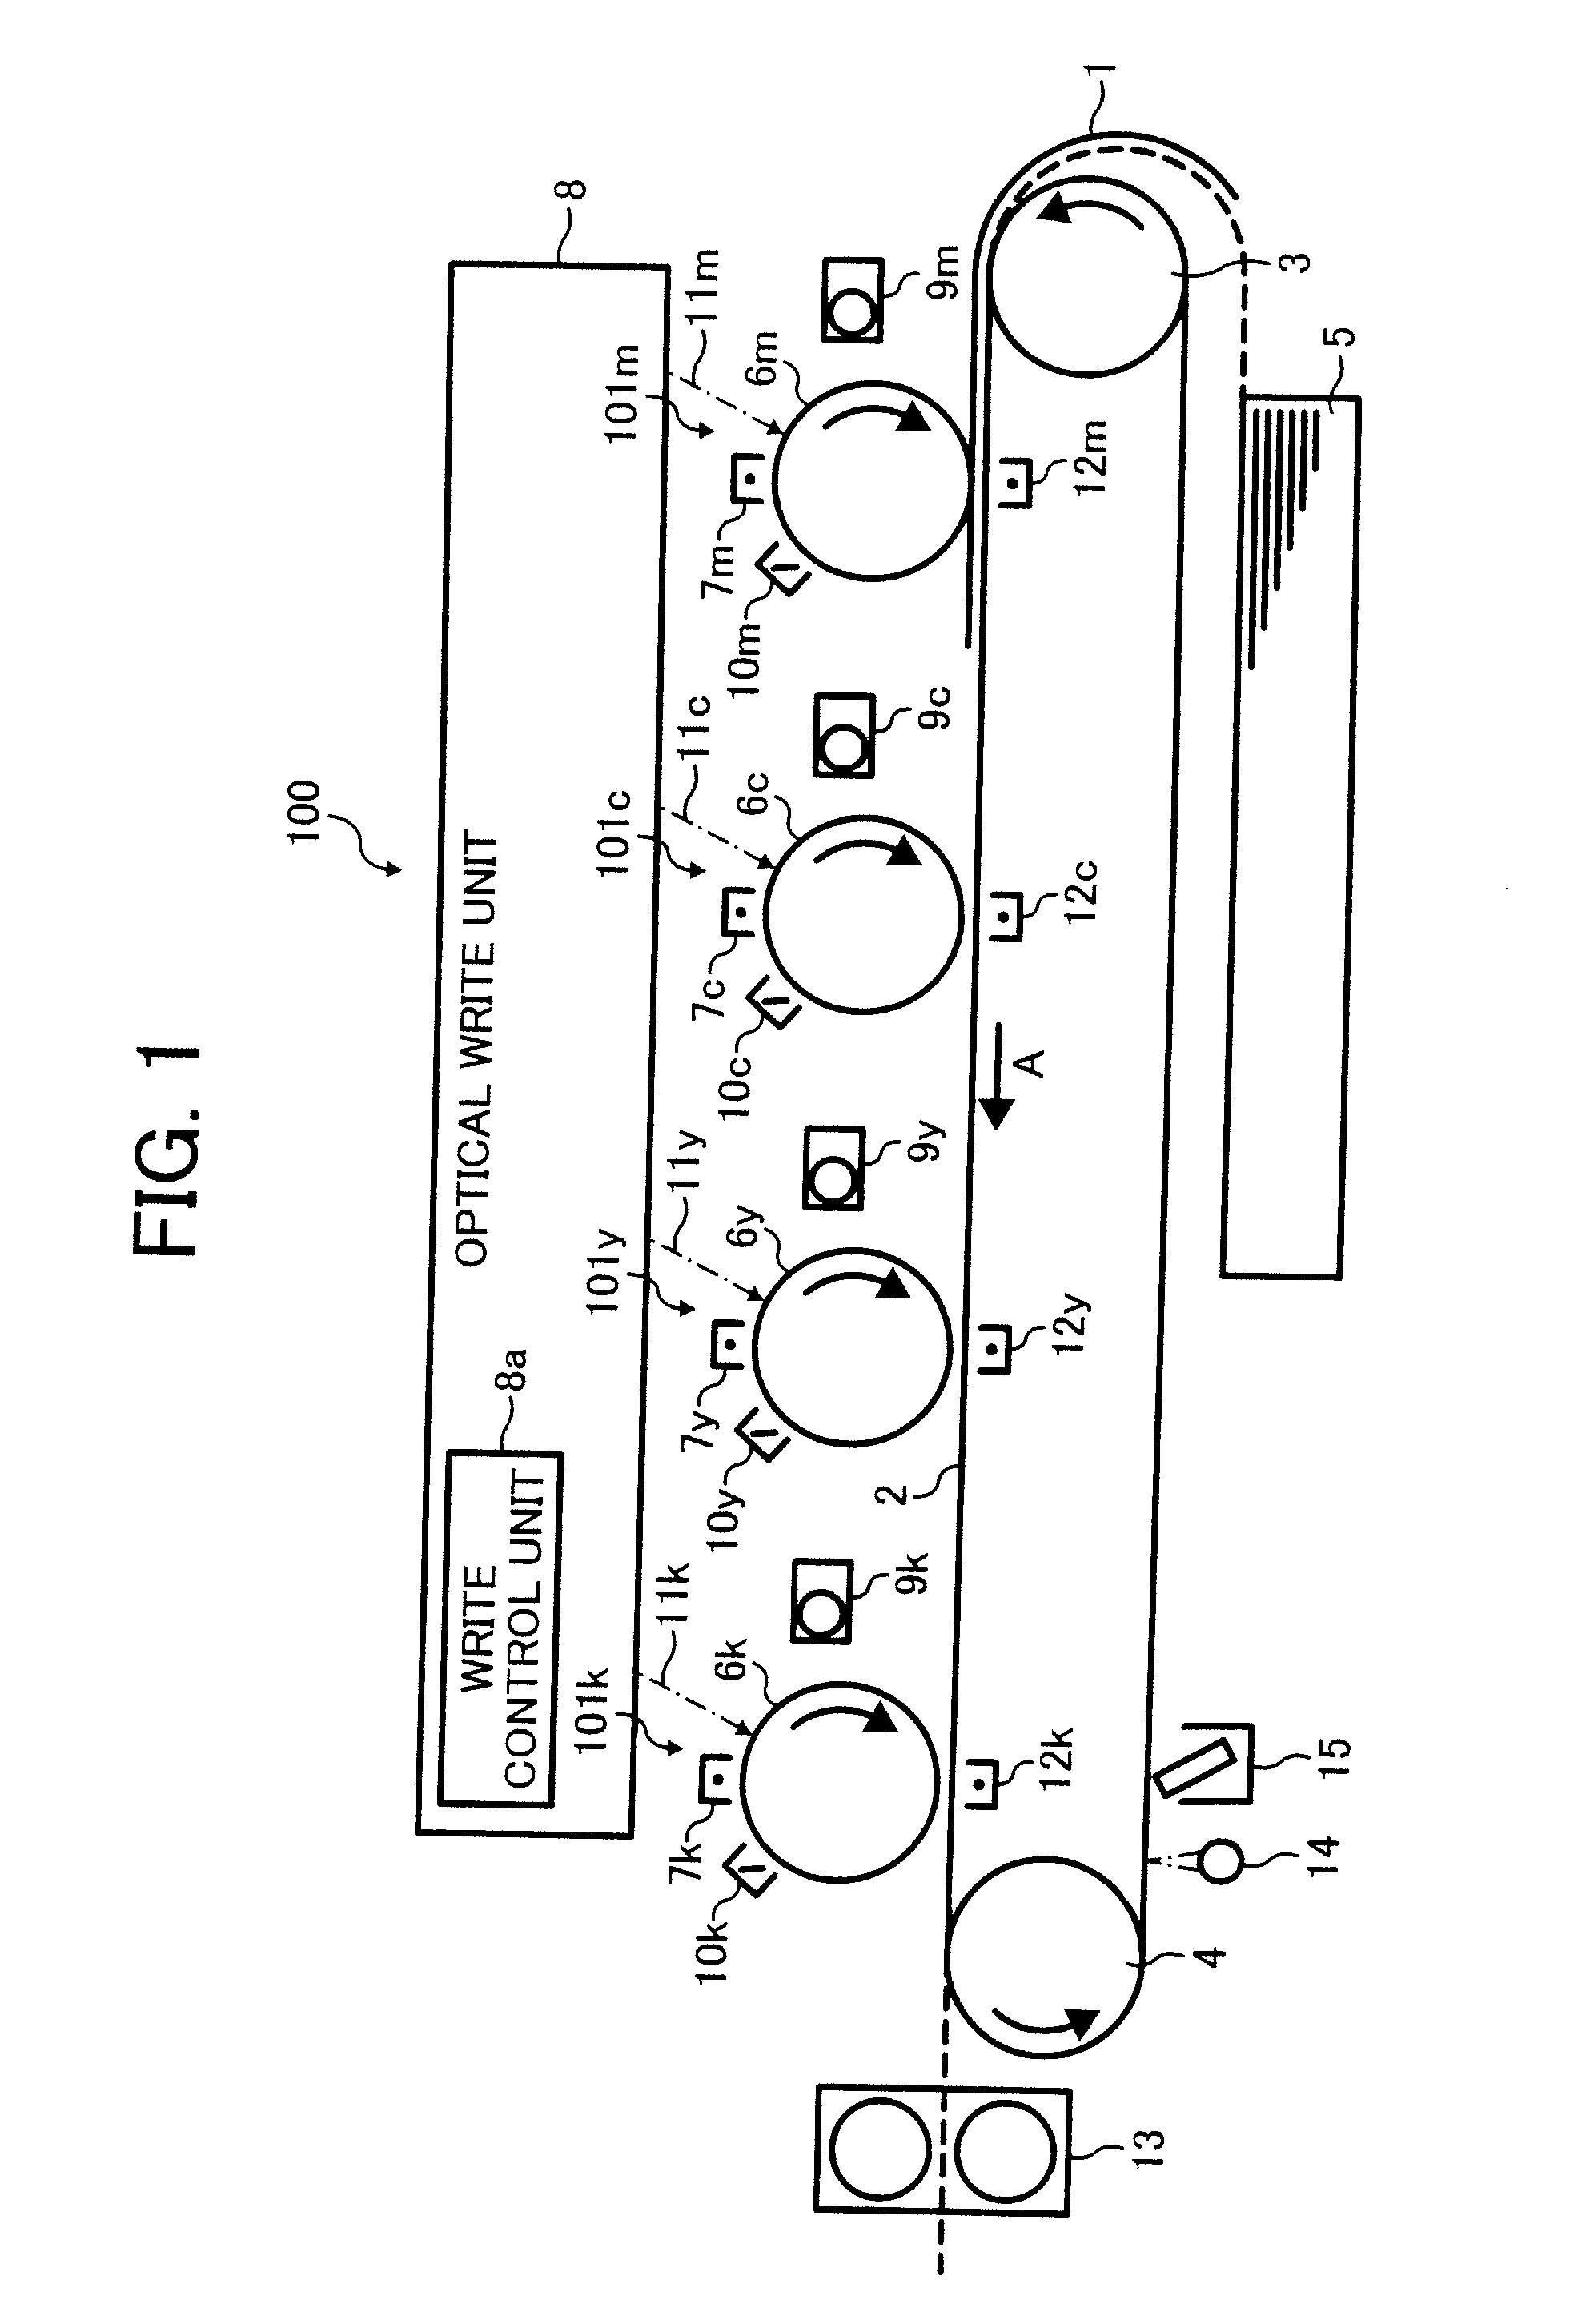 Method and apparatus for color image forming capable of effectively forming a quality color image